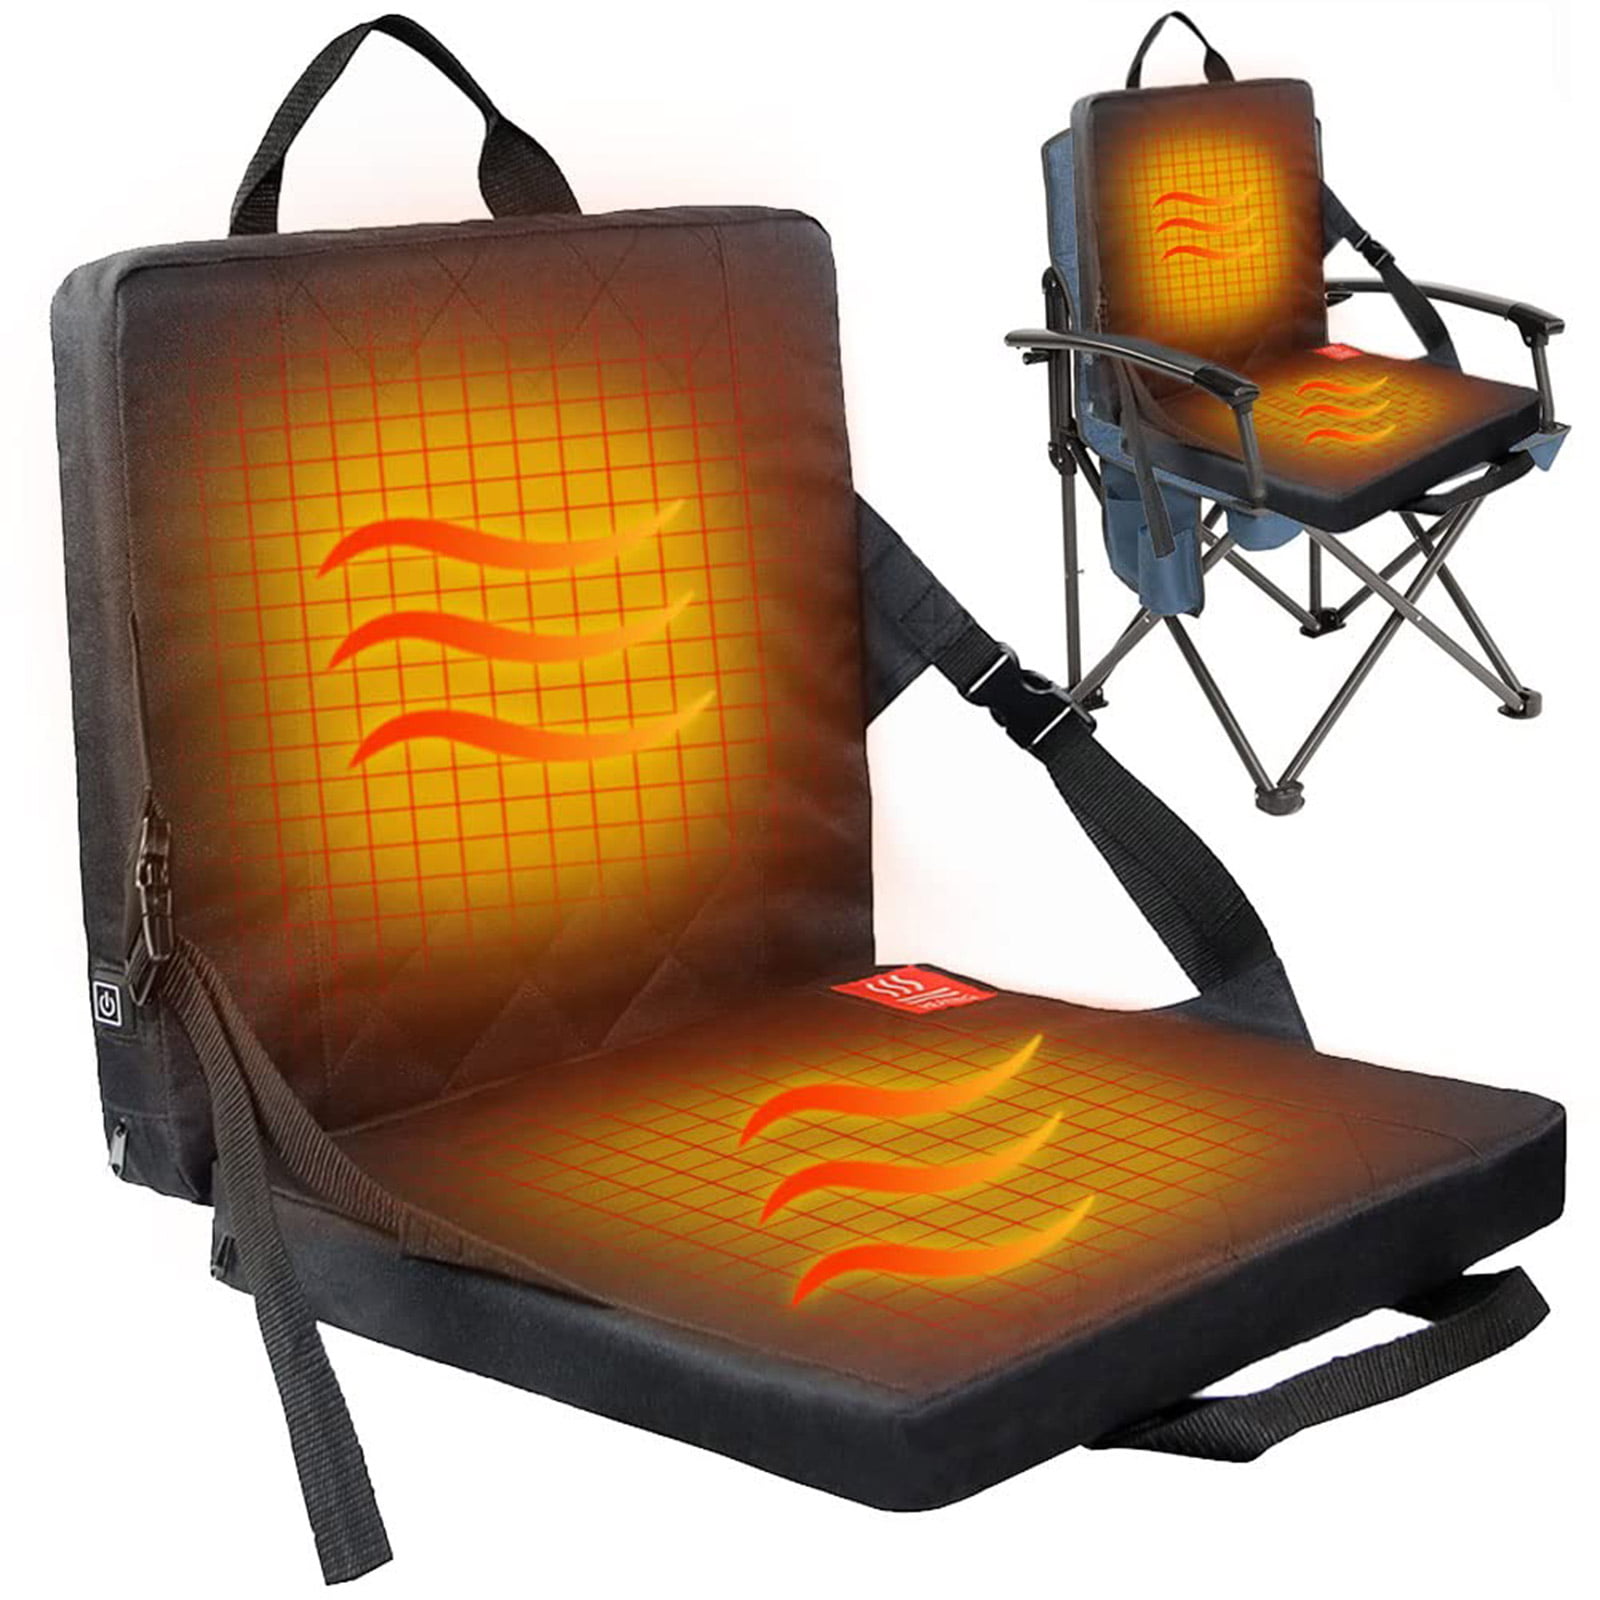 Extra Wide Heated Stadium Seat, Portable Foldable Heating Pad, 【No Power  Bank】Stadium Cushions with USB Battery Pack, Stadium Seats for Bleachers